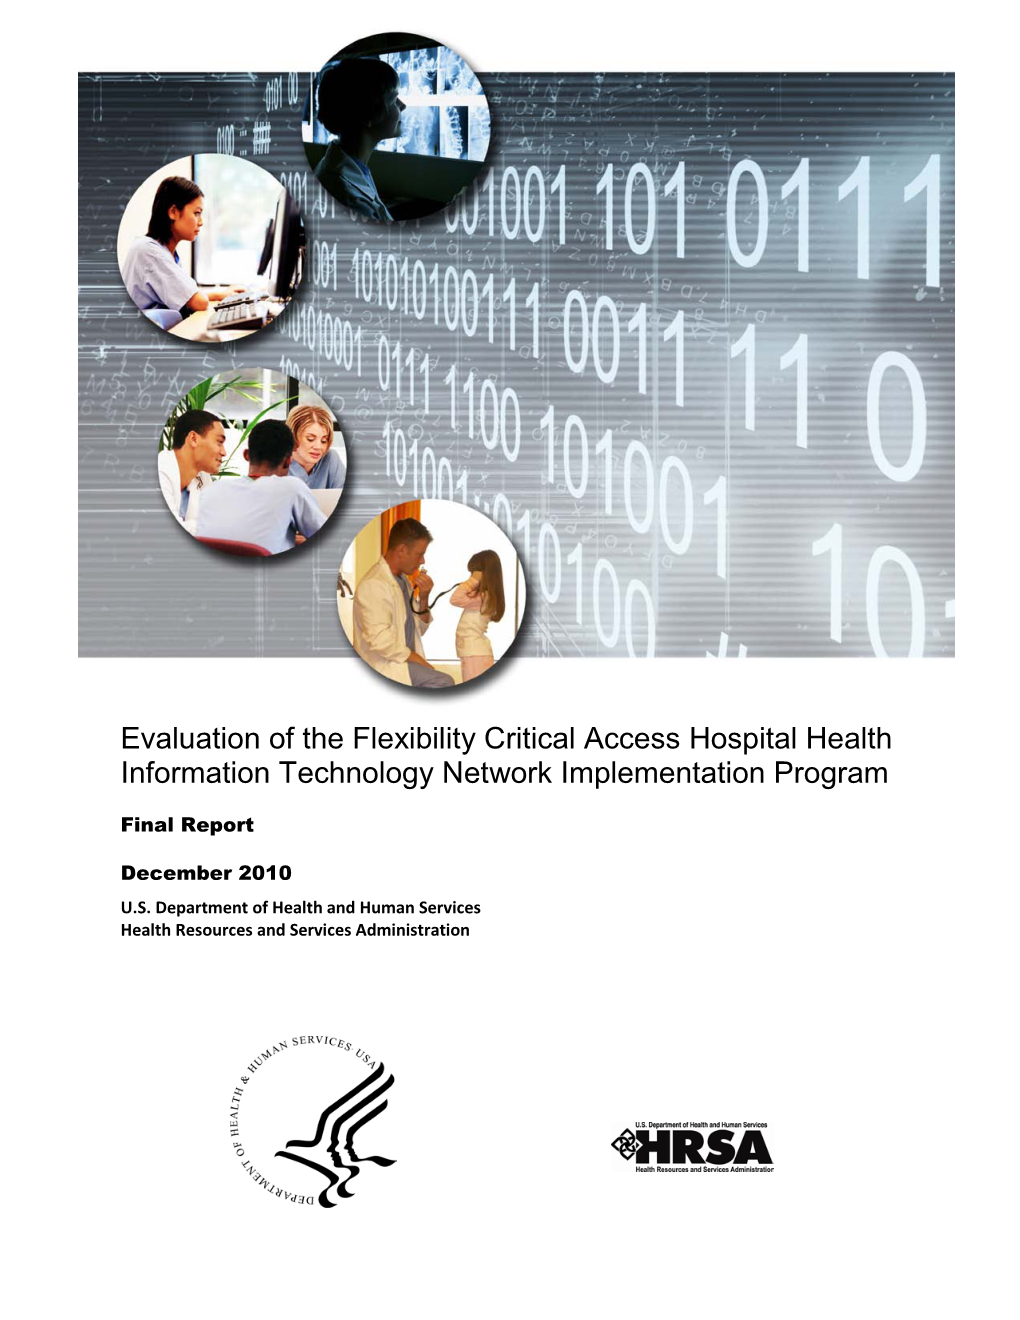 Evaluation of the Flexibility Critical Access Hospital Health Information Technology Network Implementation Program